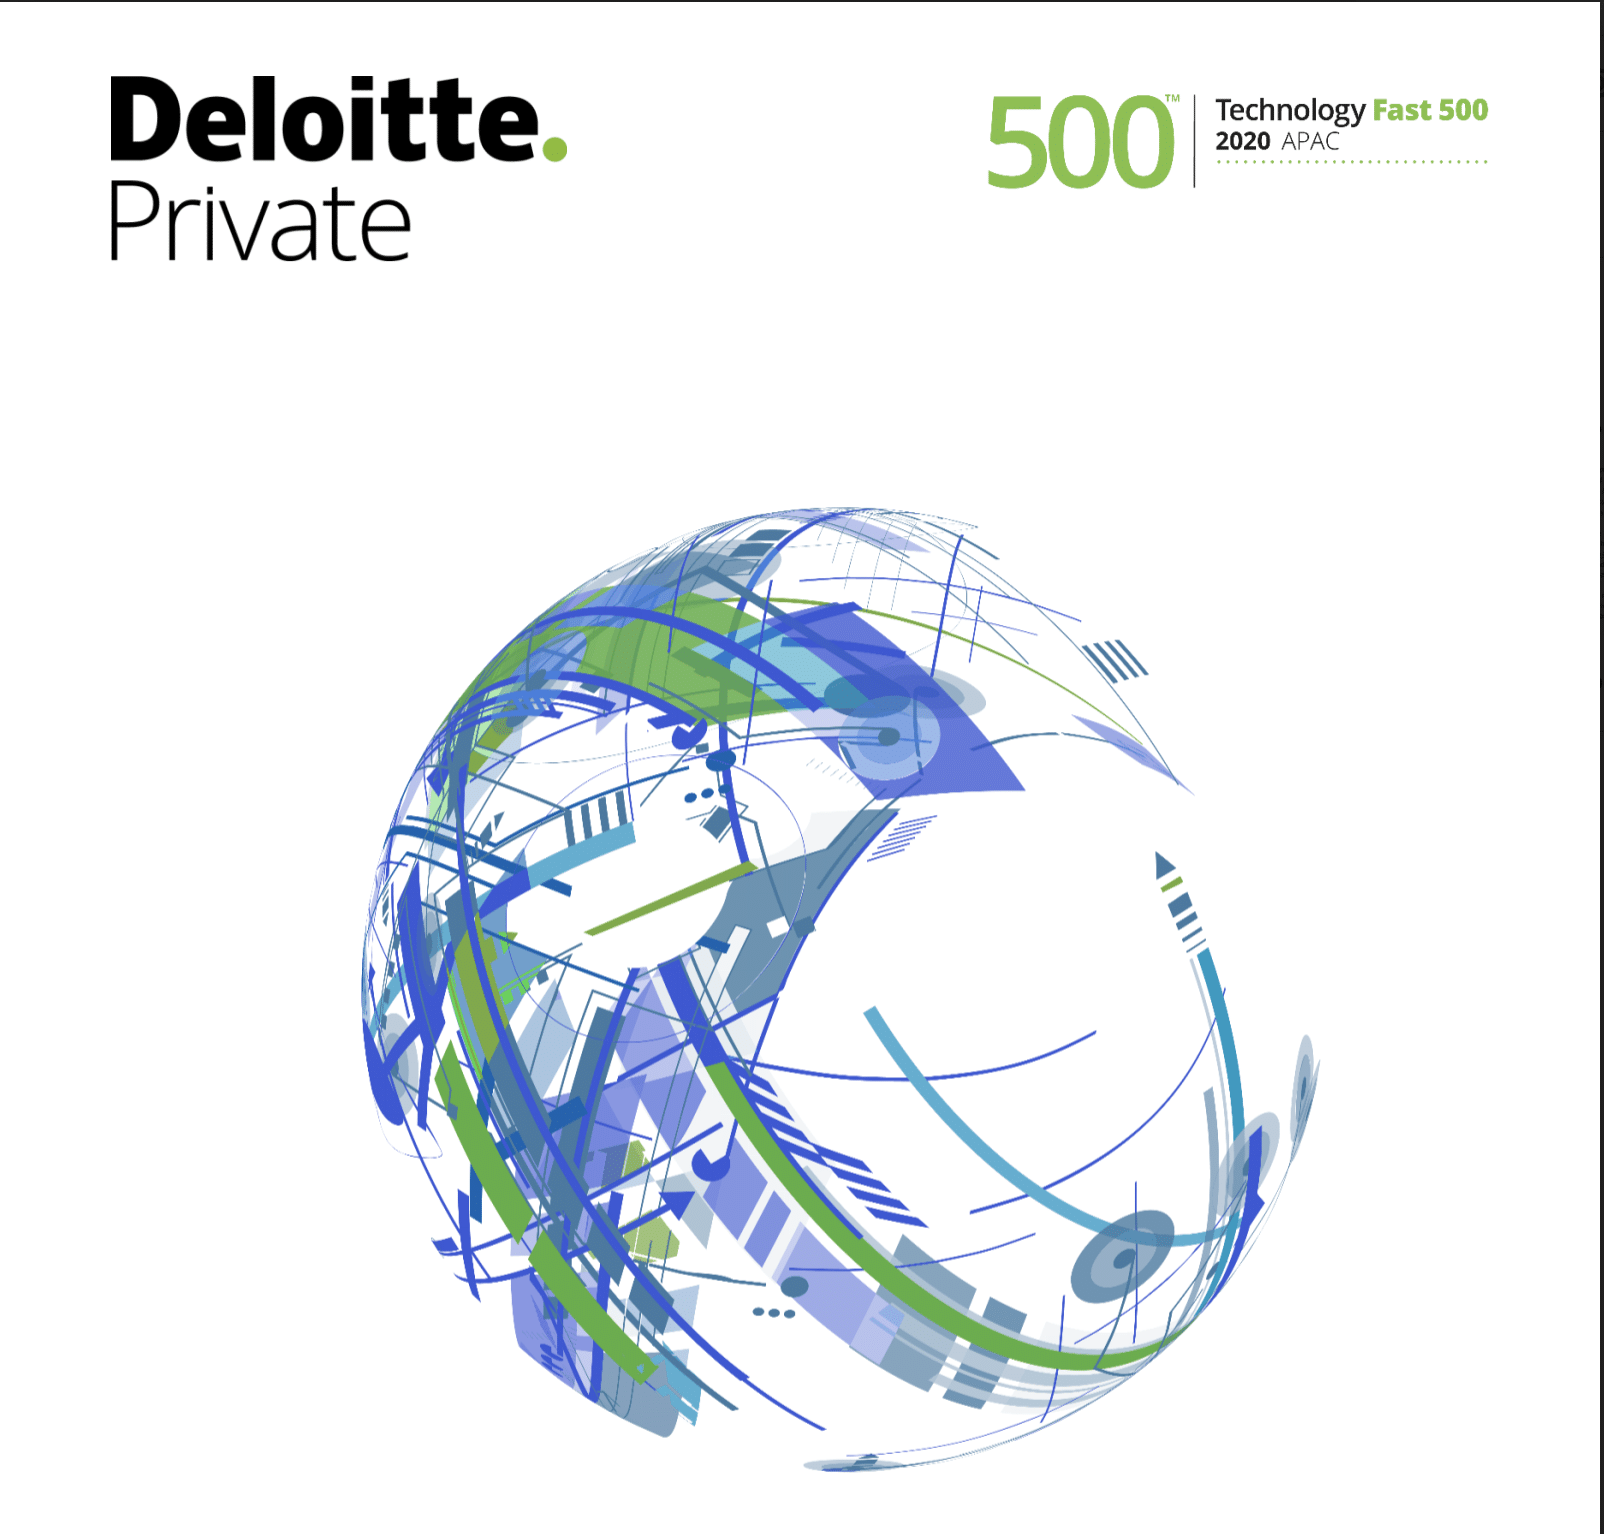 CrescoData makes Deloitte Fast 500 2 years in a row!